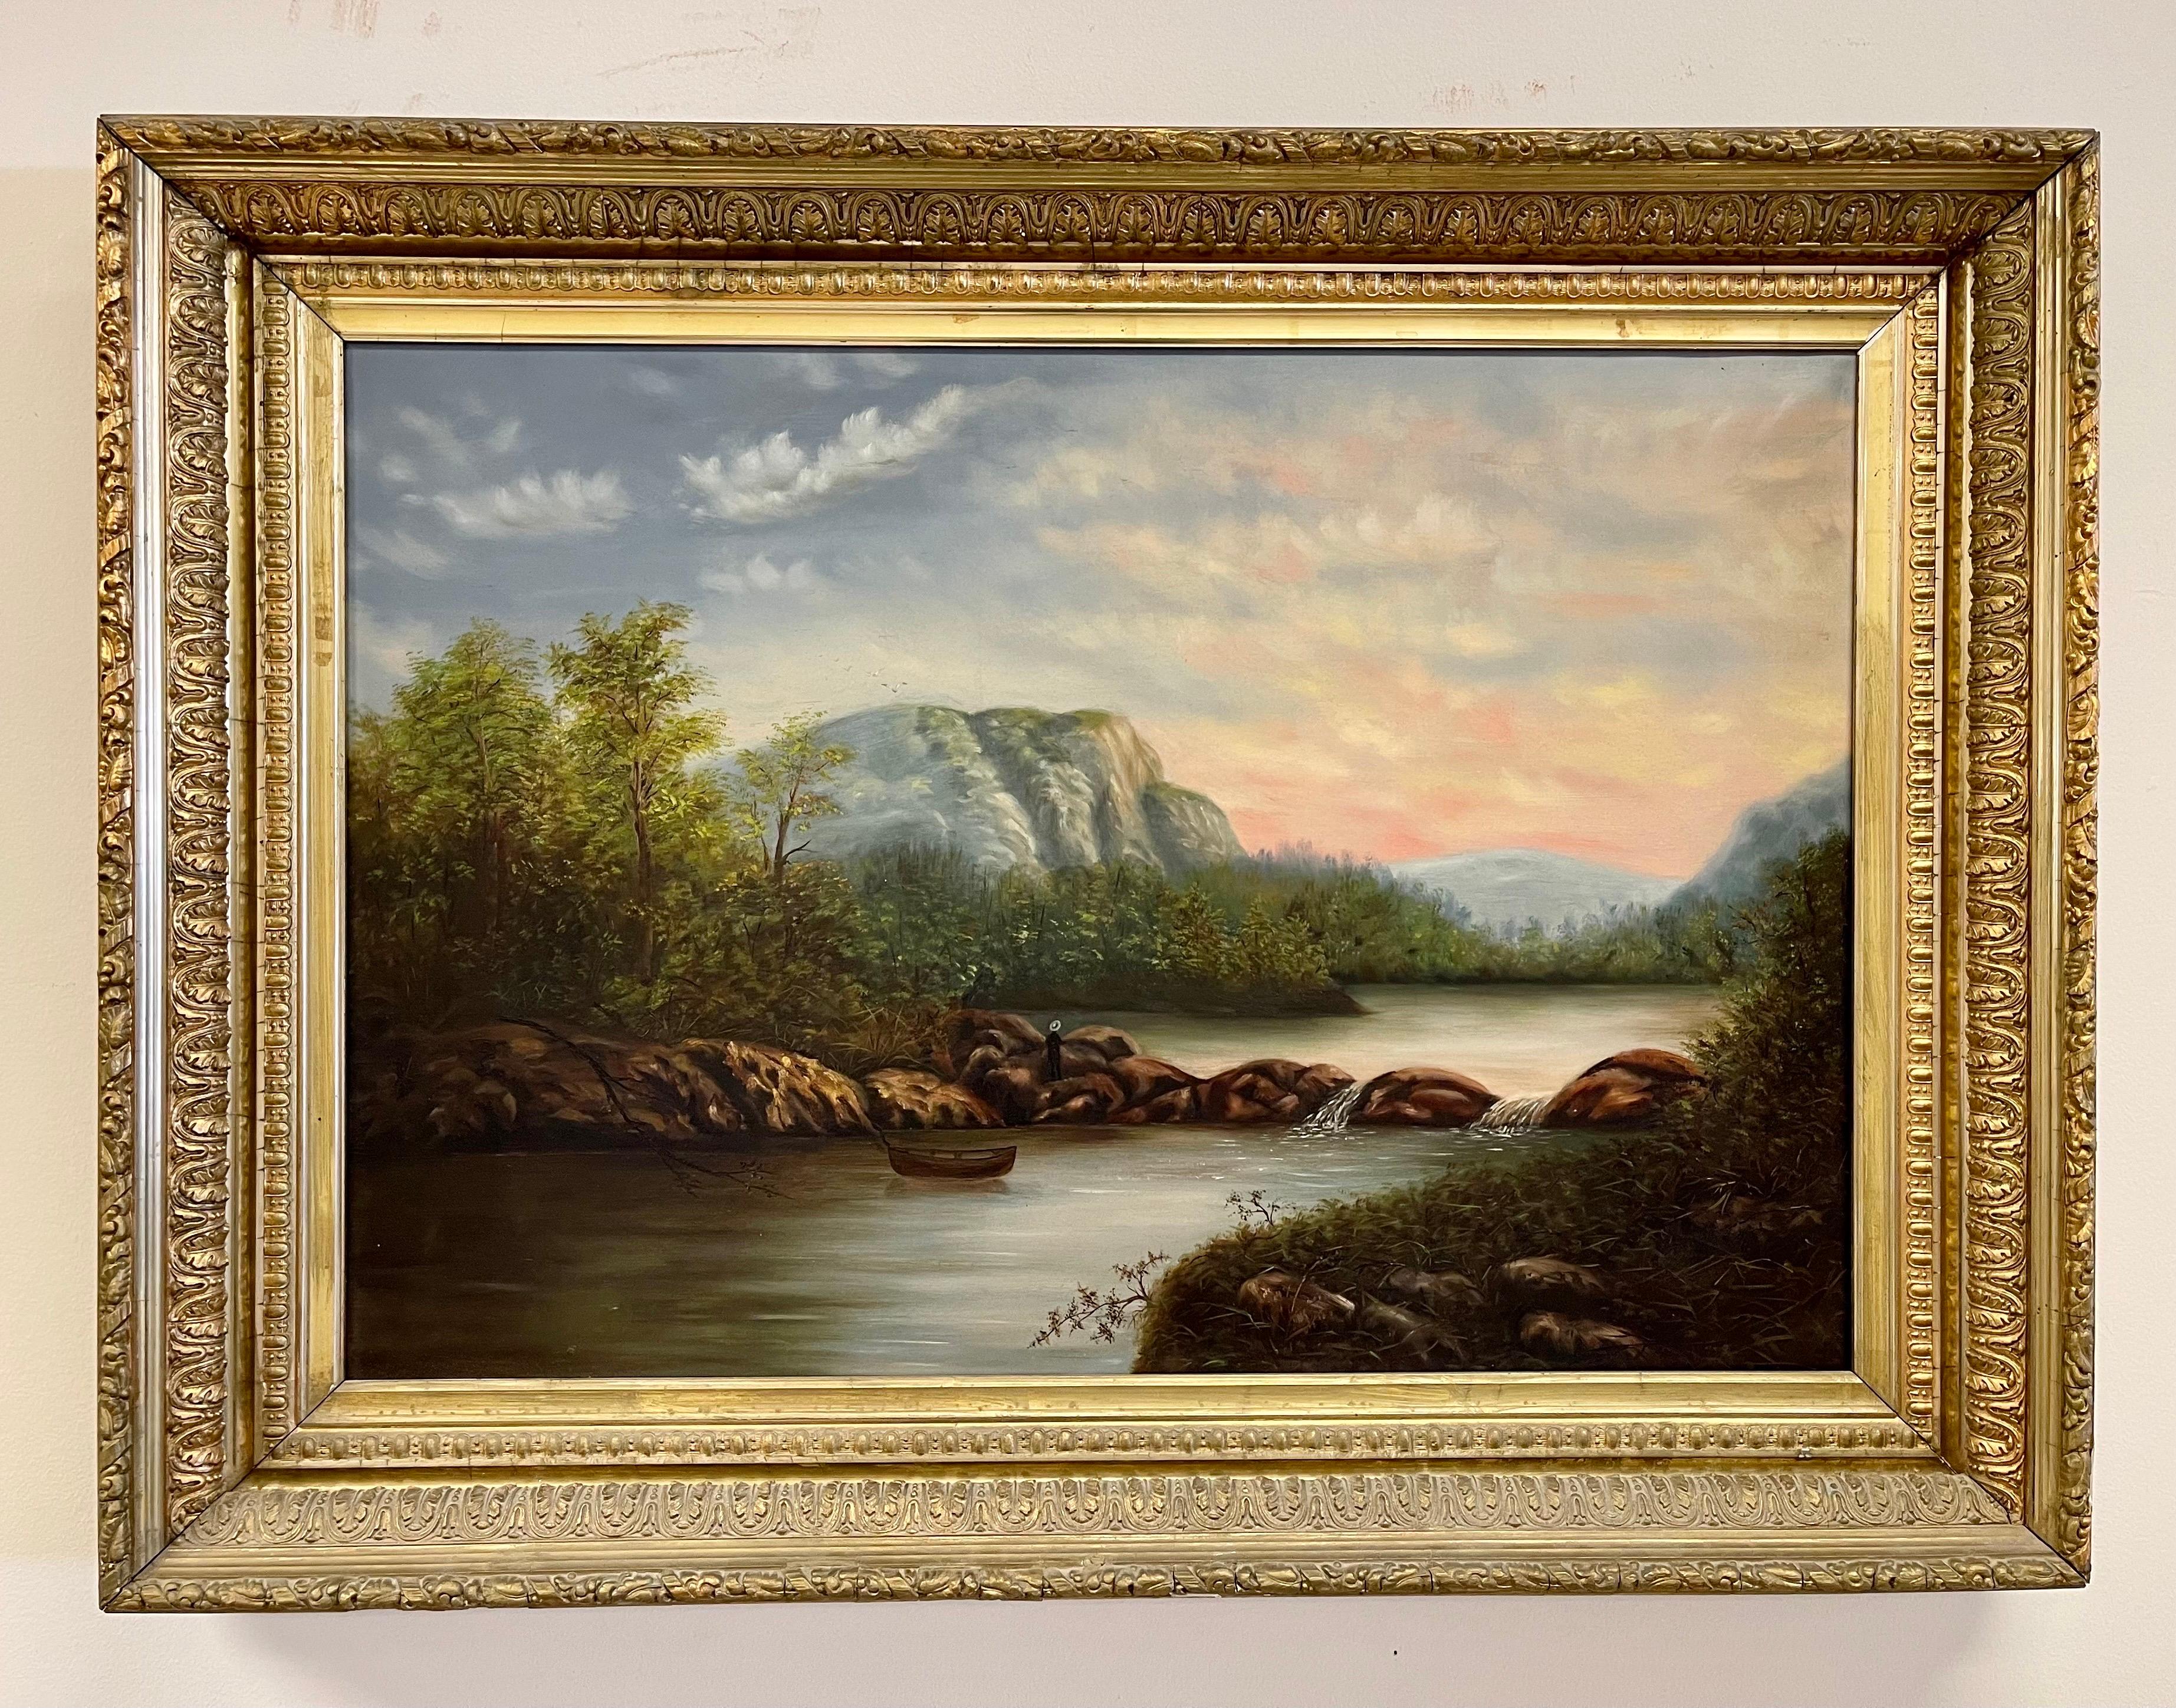 Magnificent original Hudson River School oil painting with illegible signature at bottom right. Medium is oil on canvas and piece is still in great condition, even after over 100 years. Note the lone figure towards center of piece. Features an